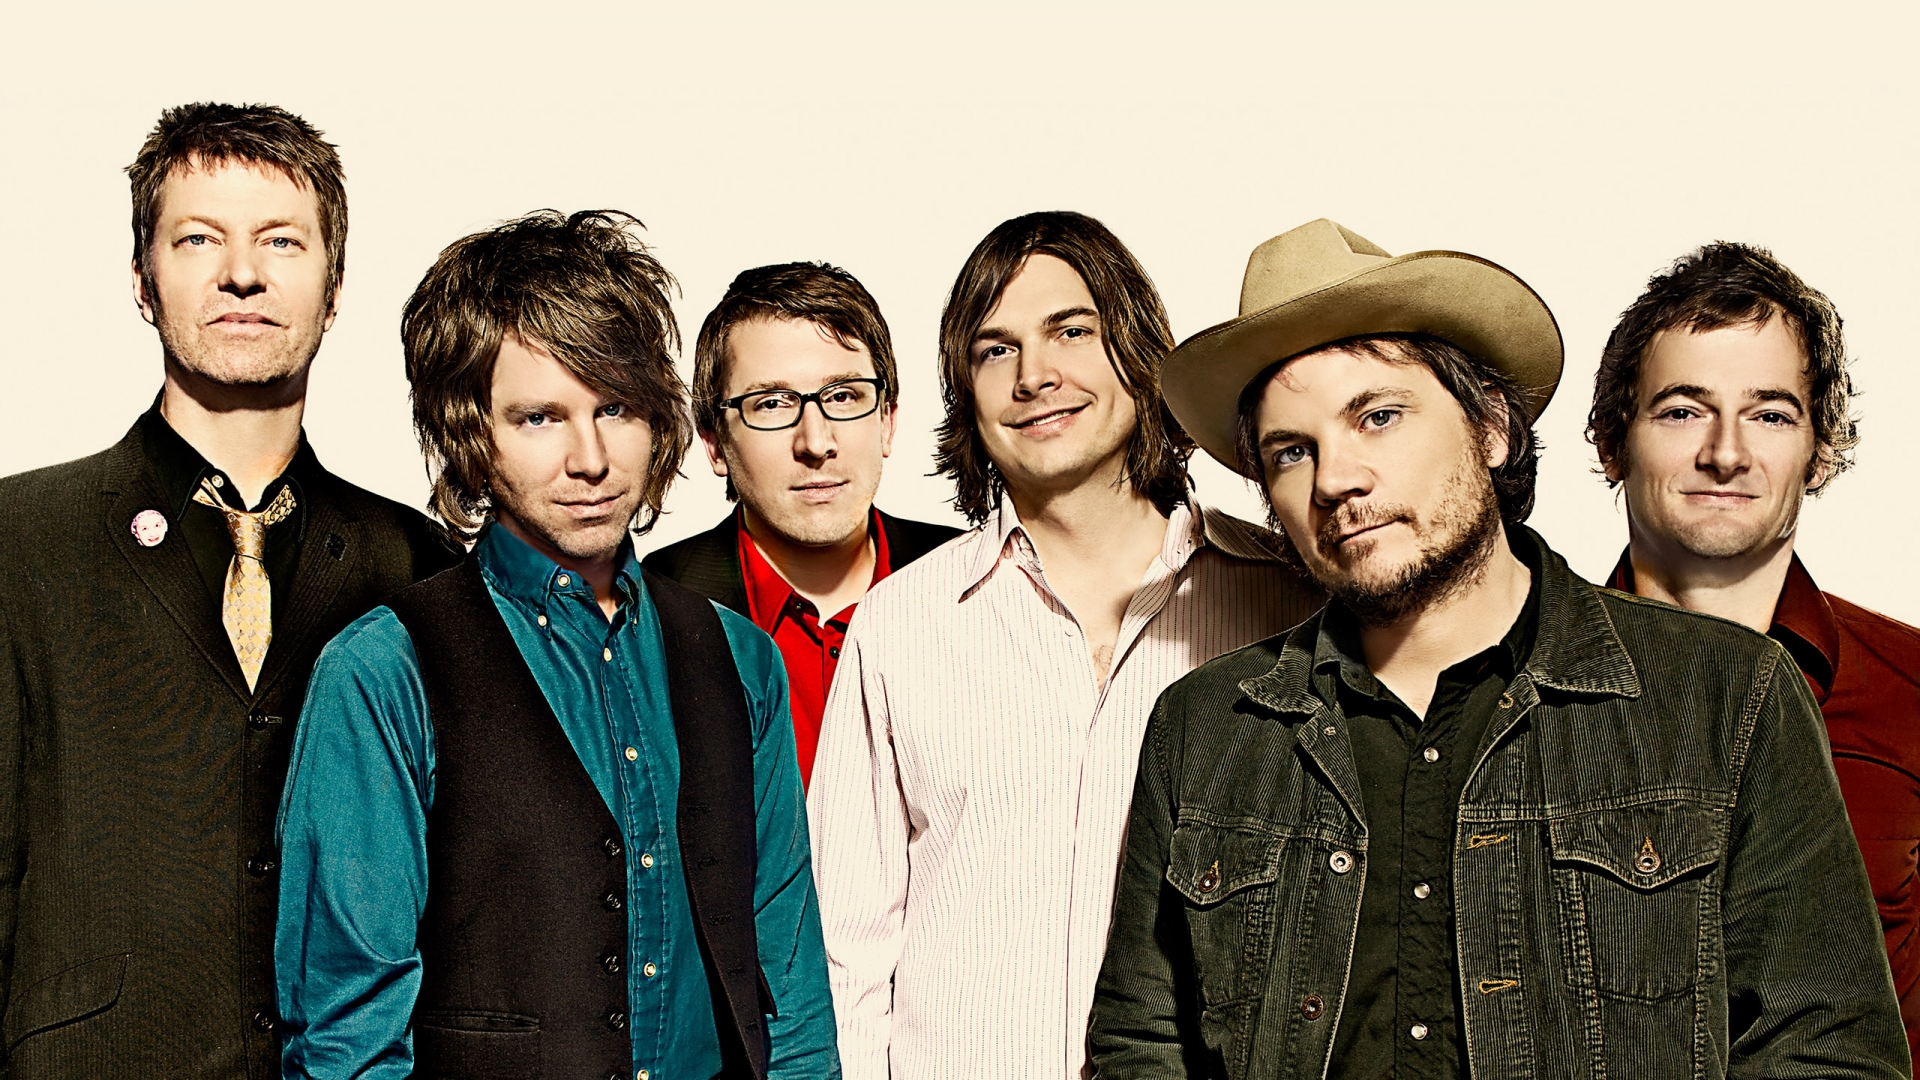 Wilco Band for 1920 x 1080 HDTV 1080p resolution